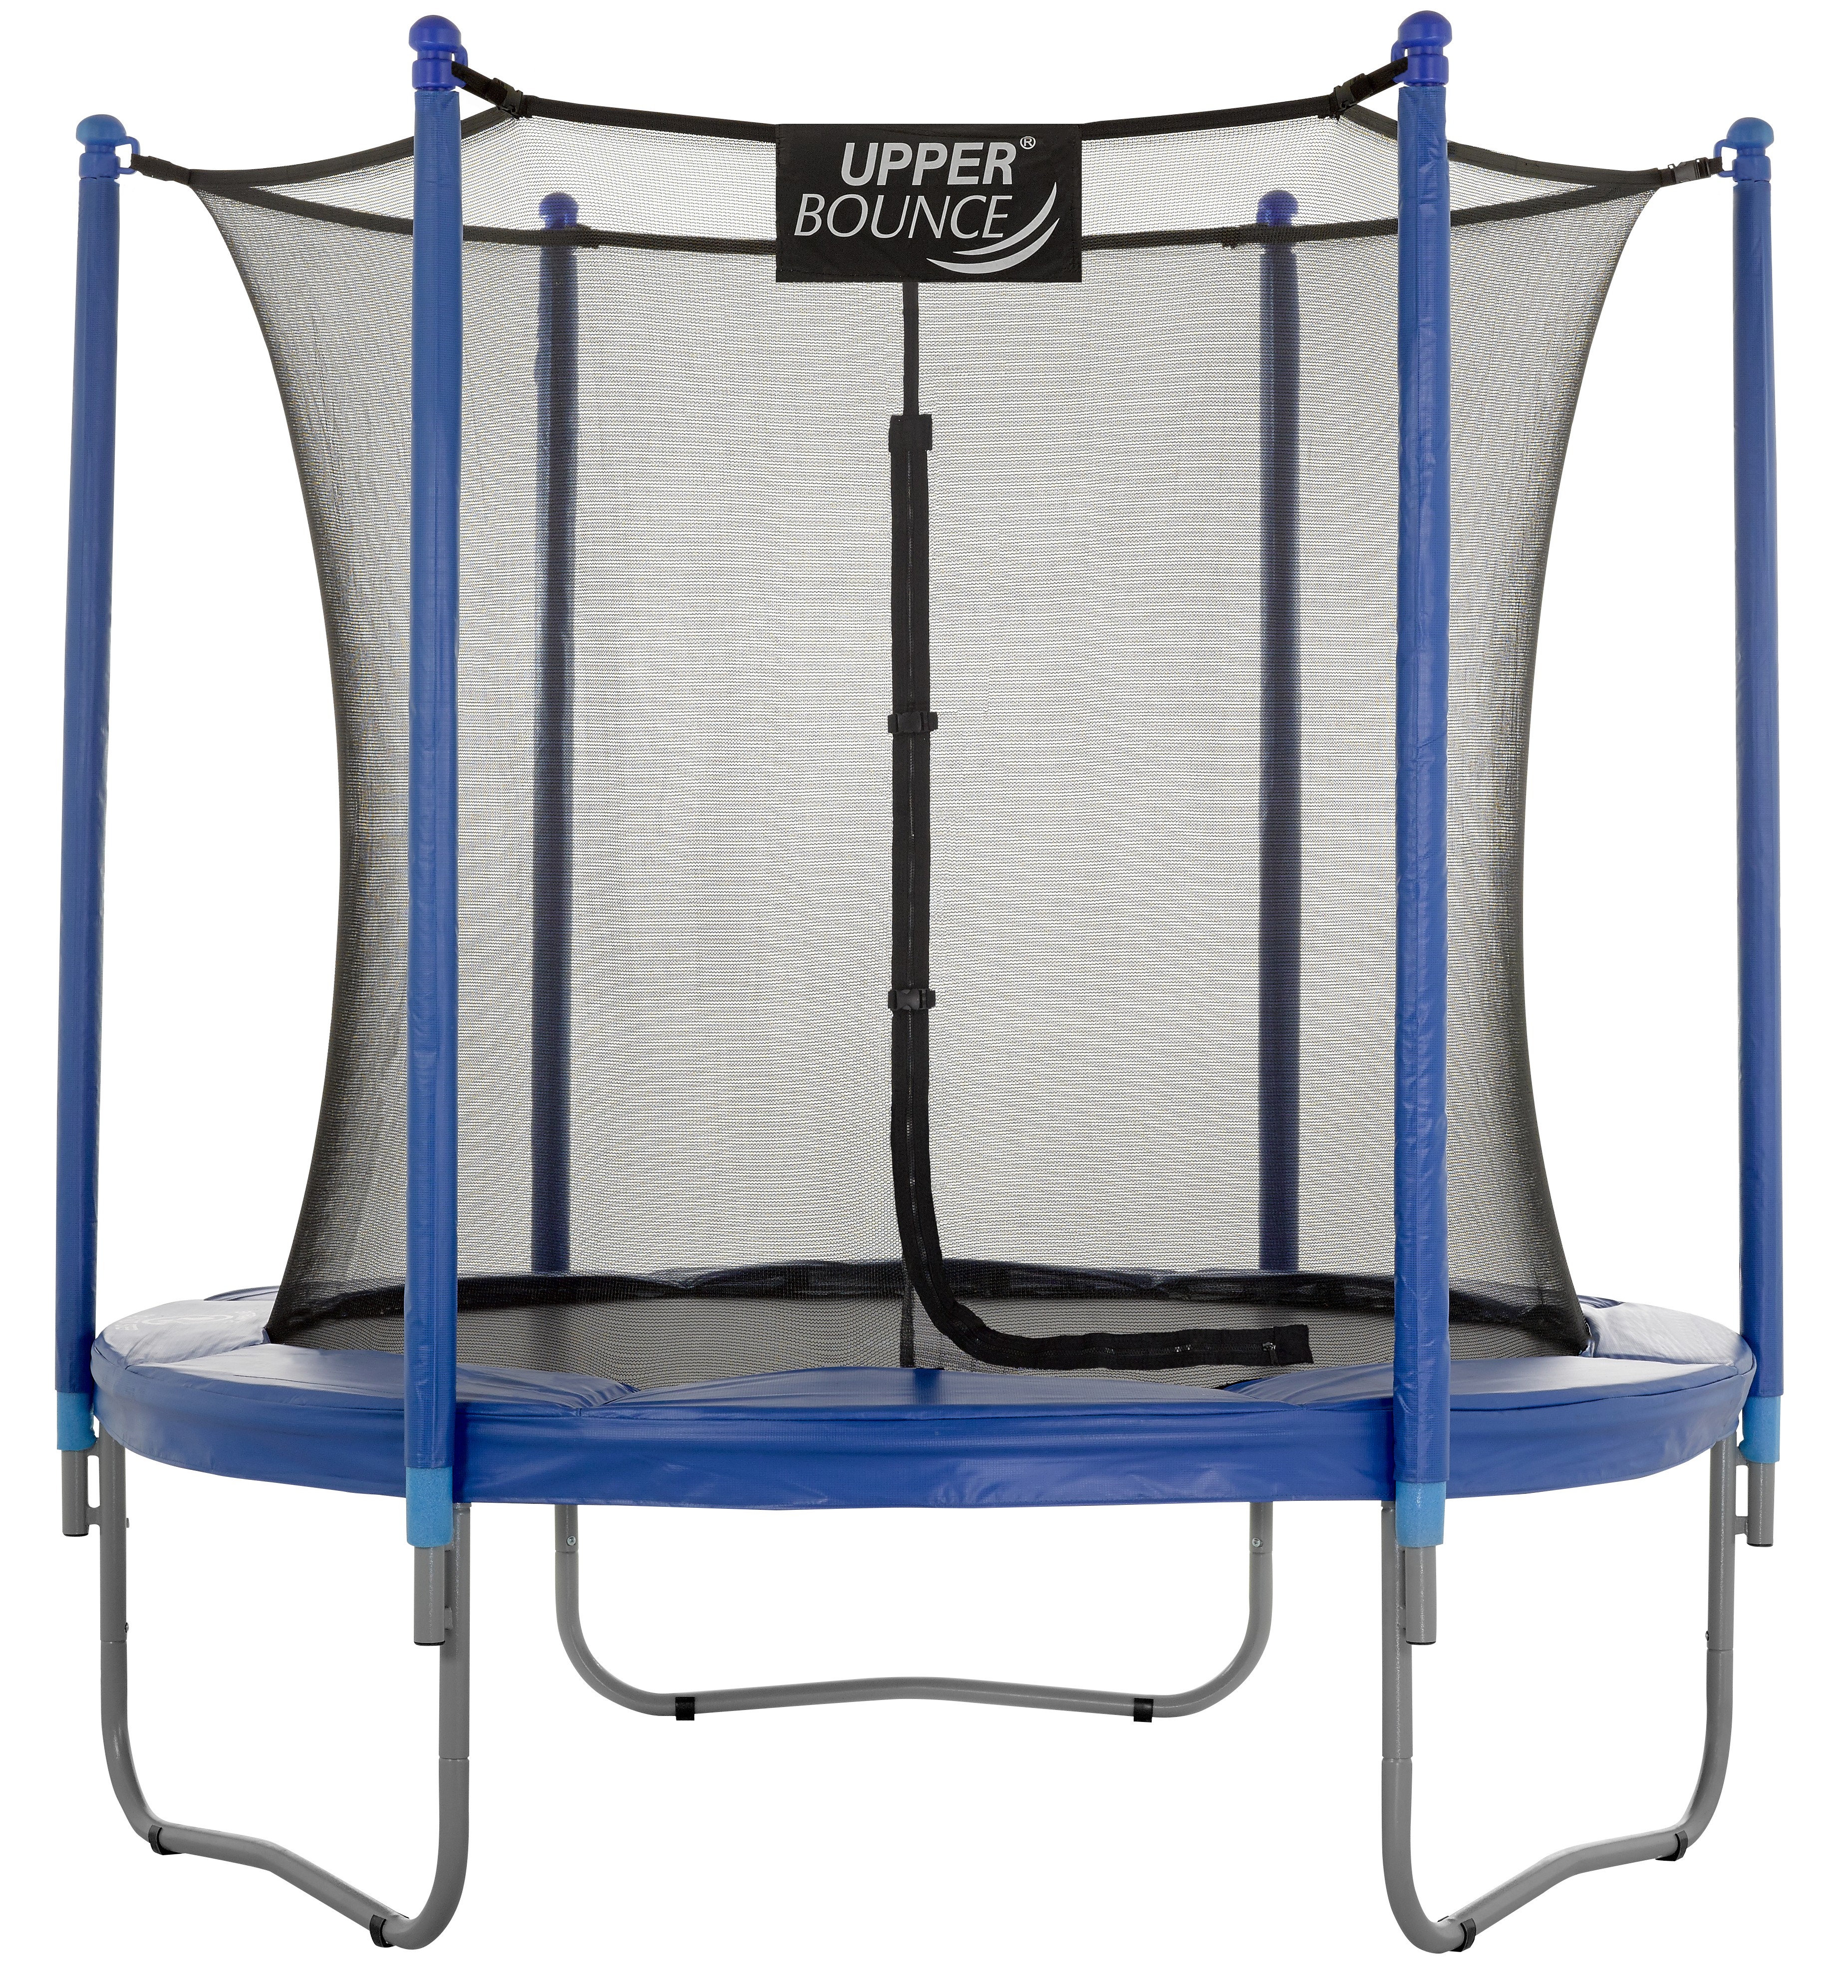 7.5Ft 229cm Large Trampoline and Enclosure Set | Garden & Outdoor Trampoline with Safety Net, Mat, Pad | Blue